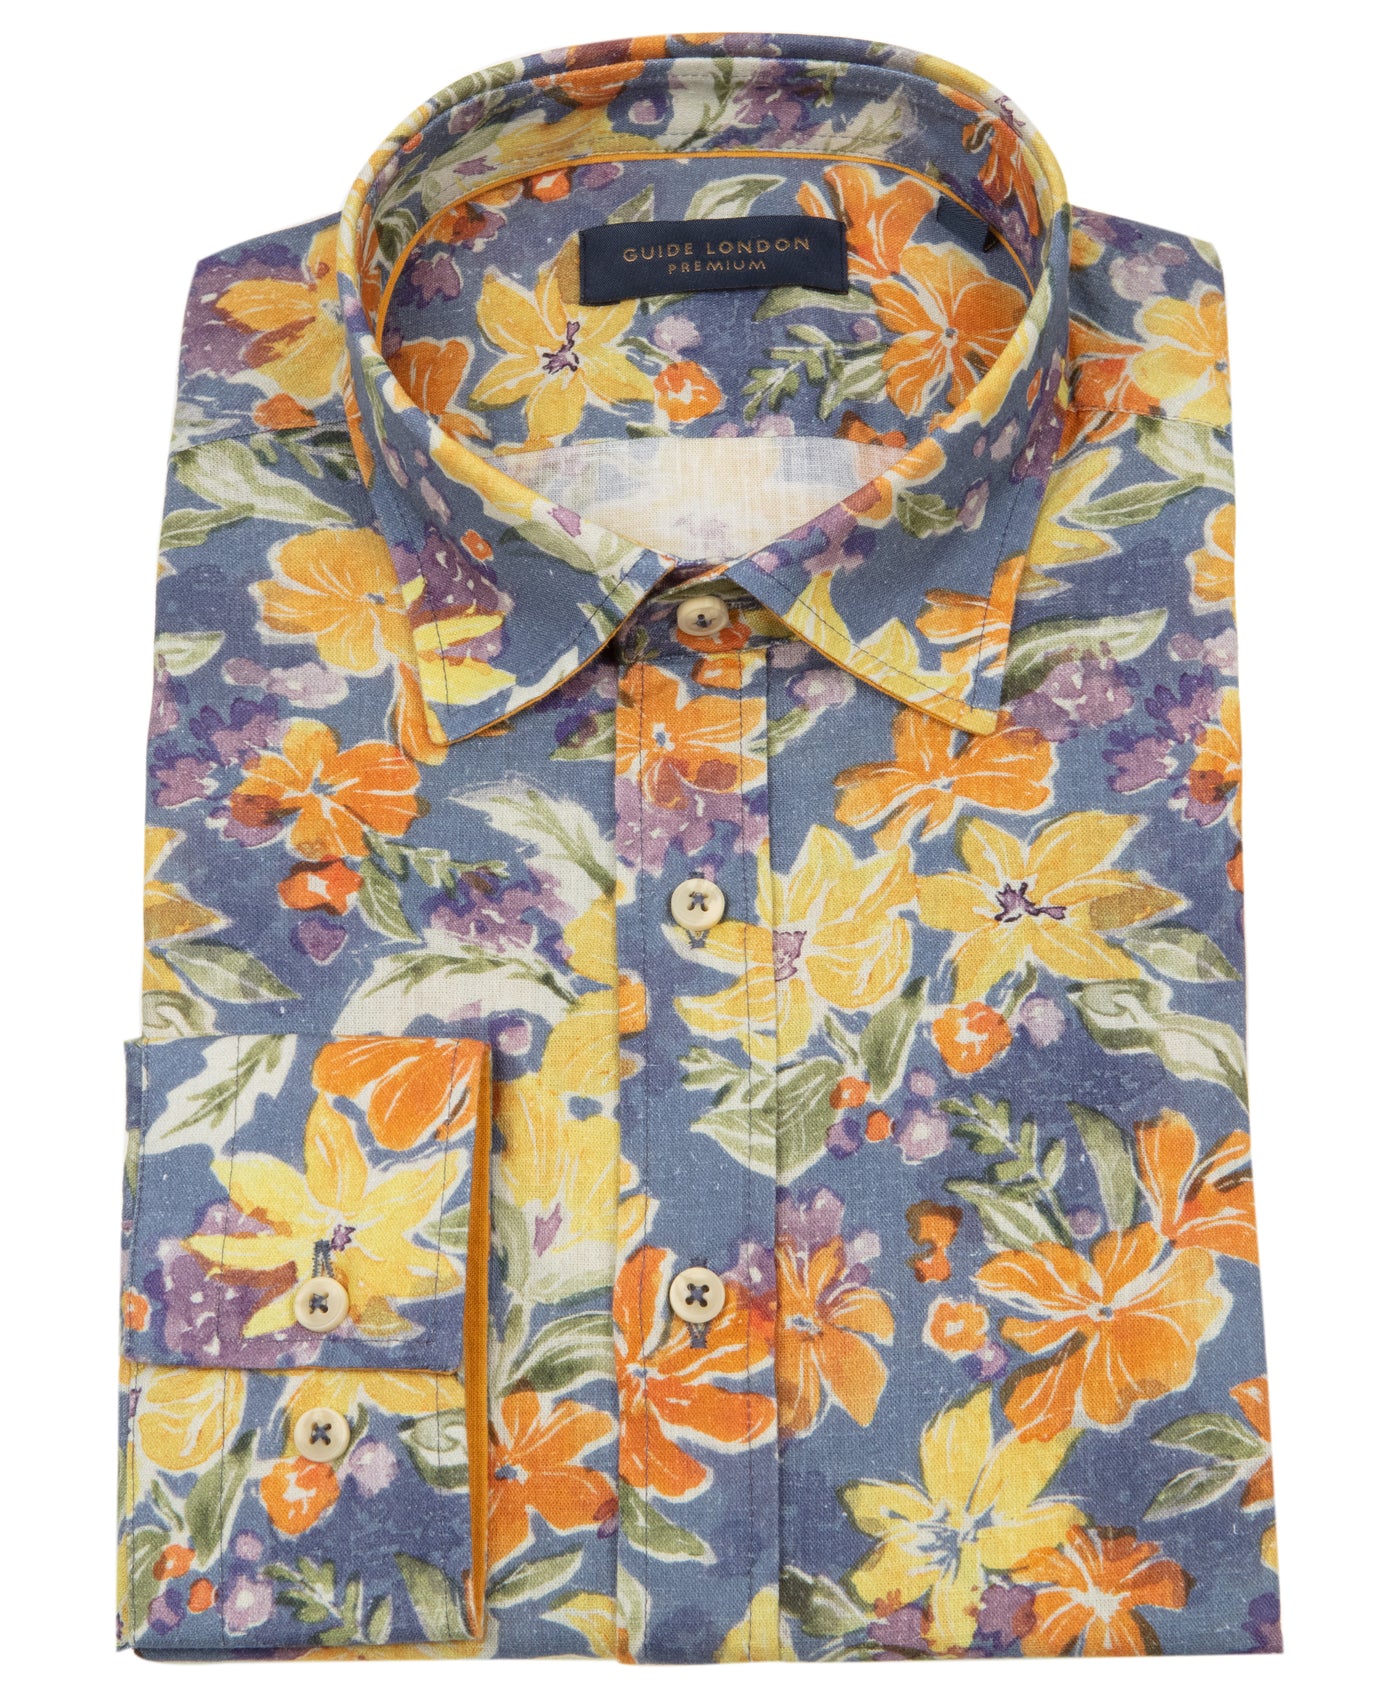 Folded Tropical Paradise Long Sleeve Shirt with yellow, orange and navy floral pattern on White Background